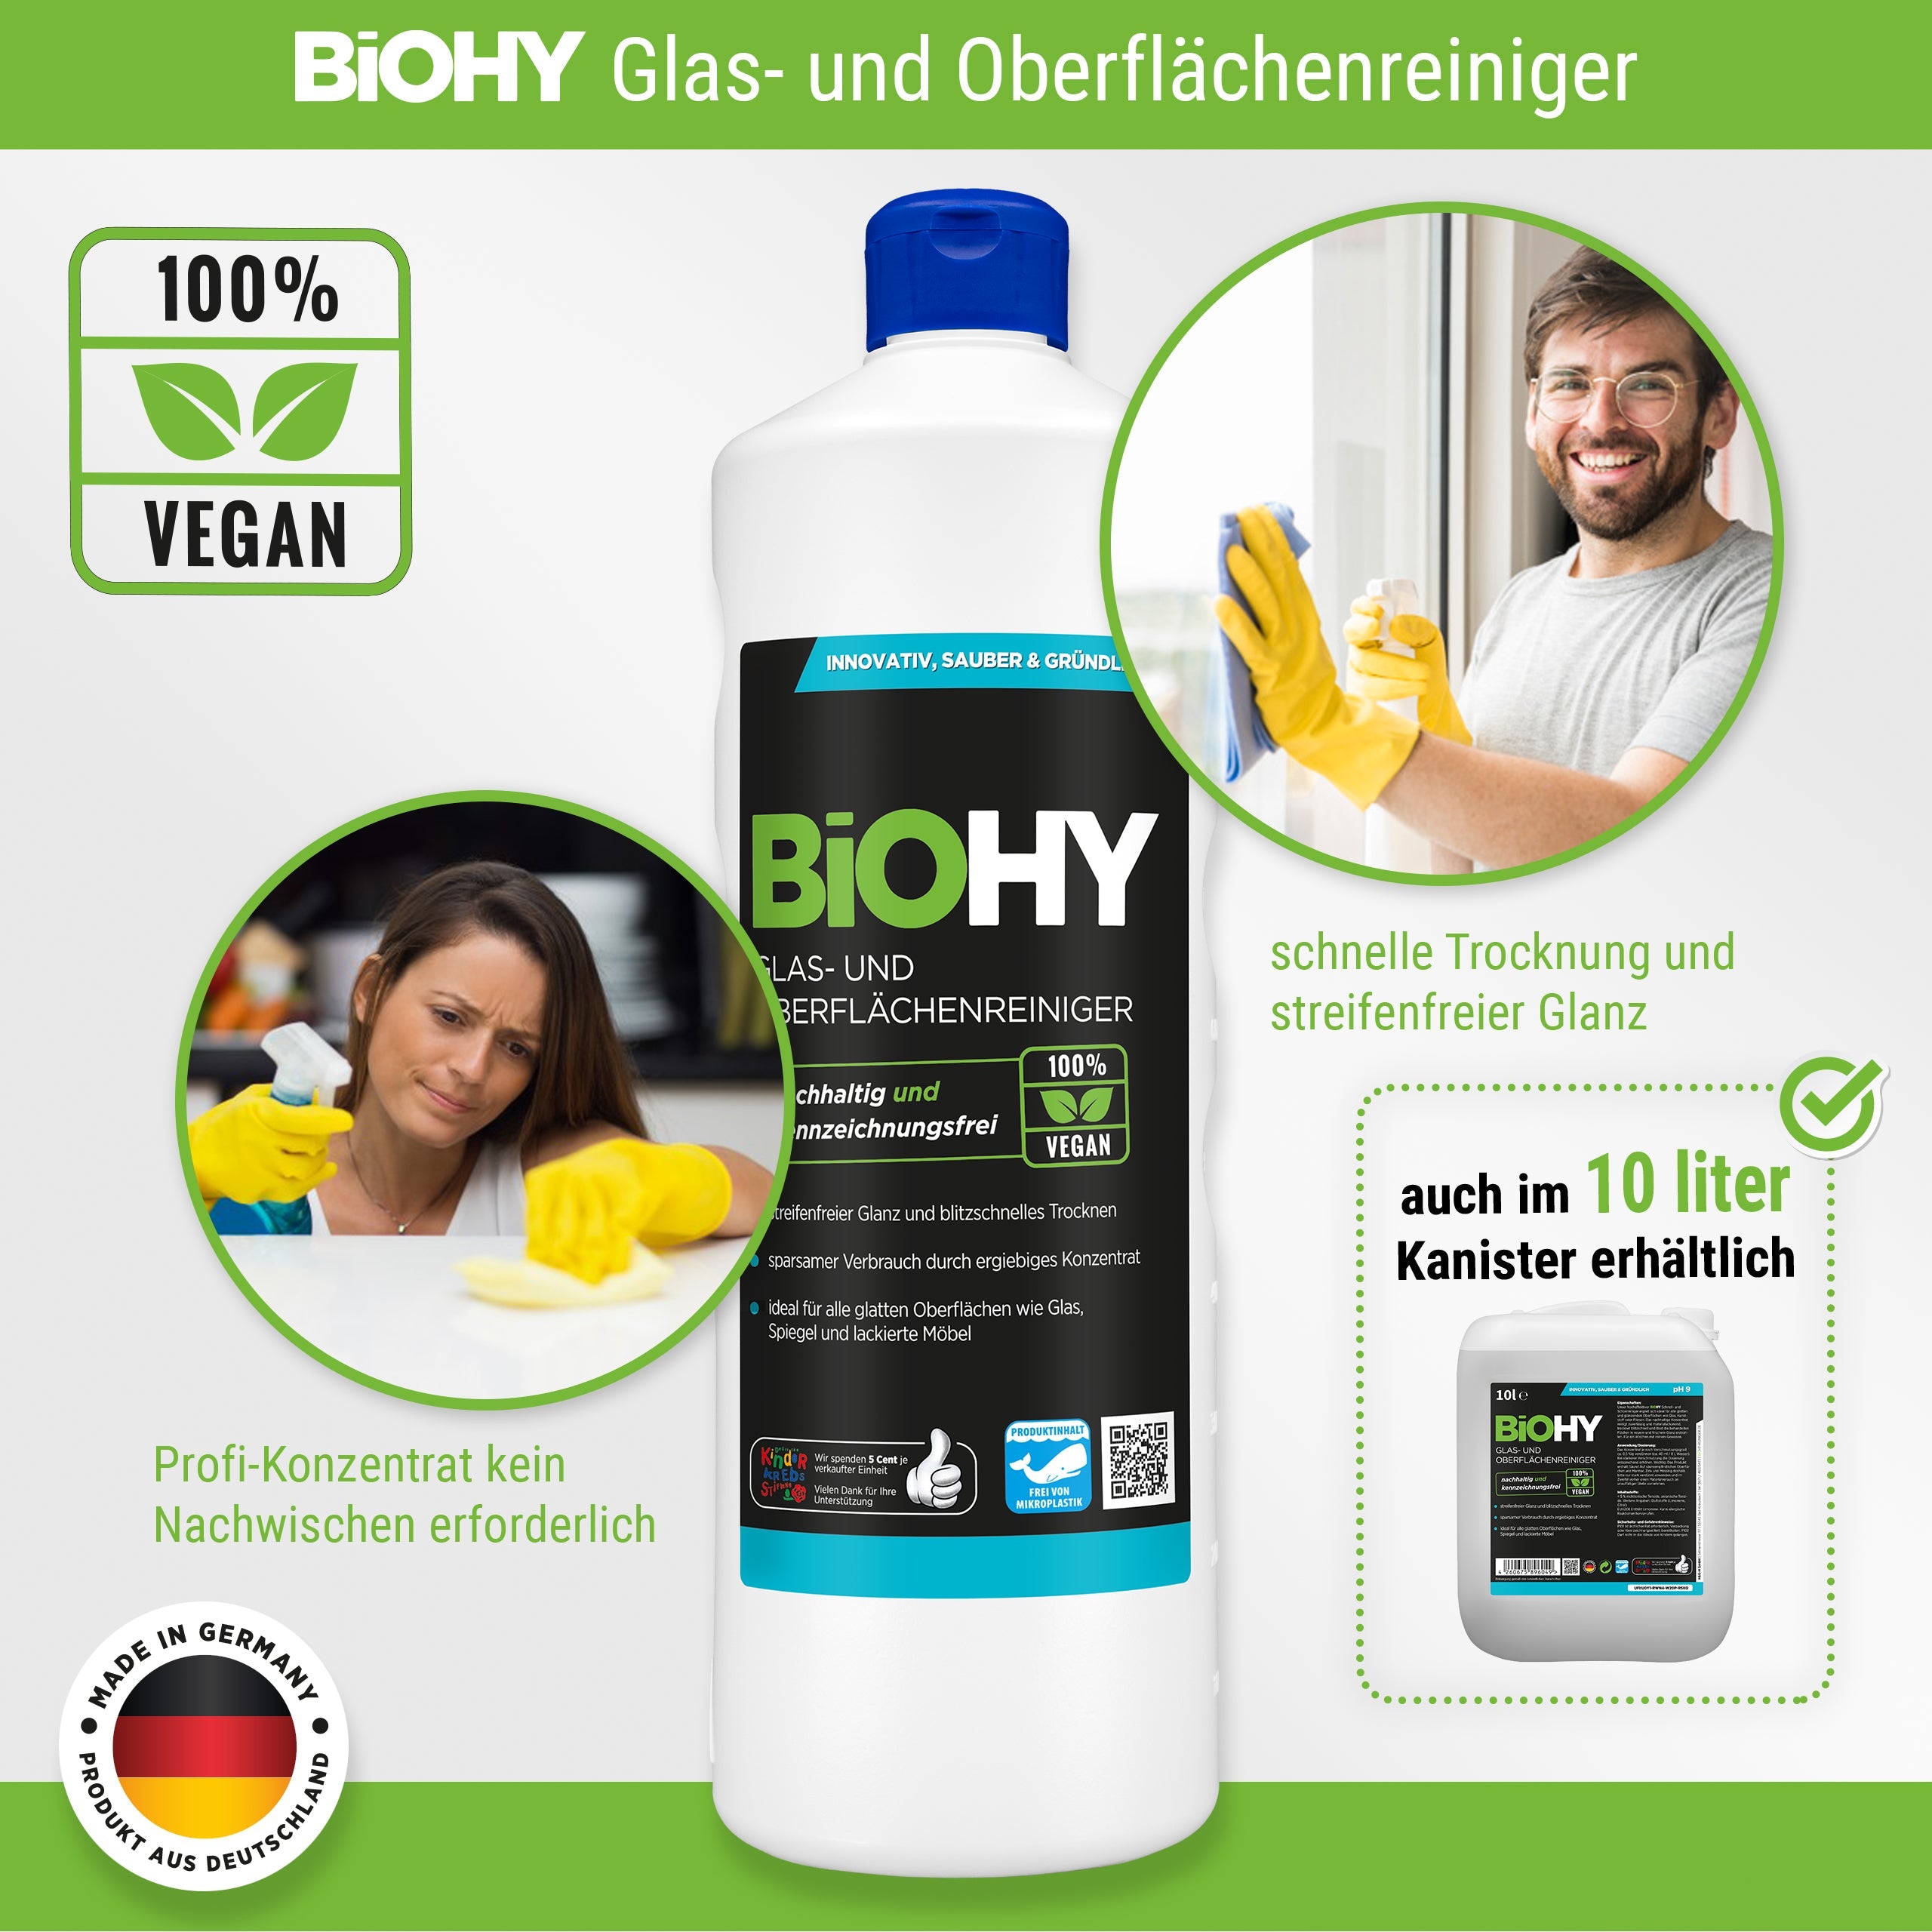 BiOHY glass and surface cleaner, glass cleaner, surface cleaner, window cleaning agent